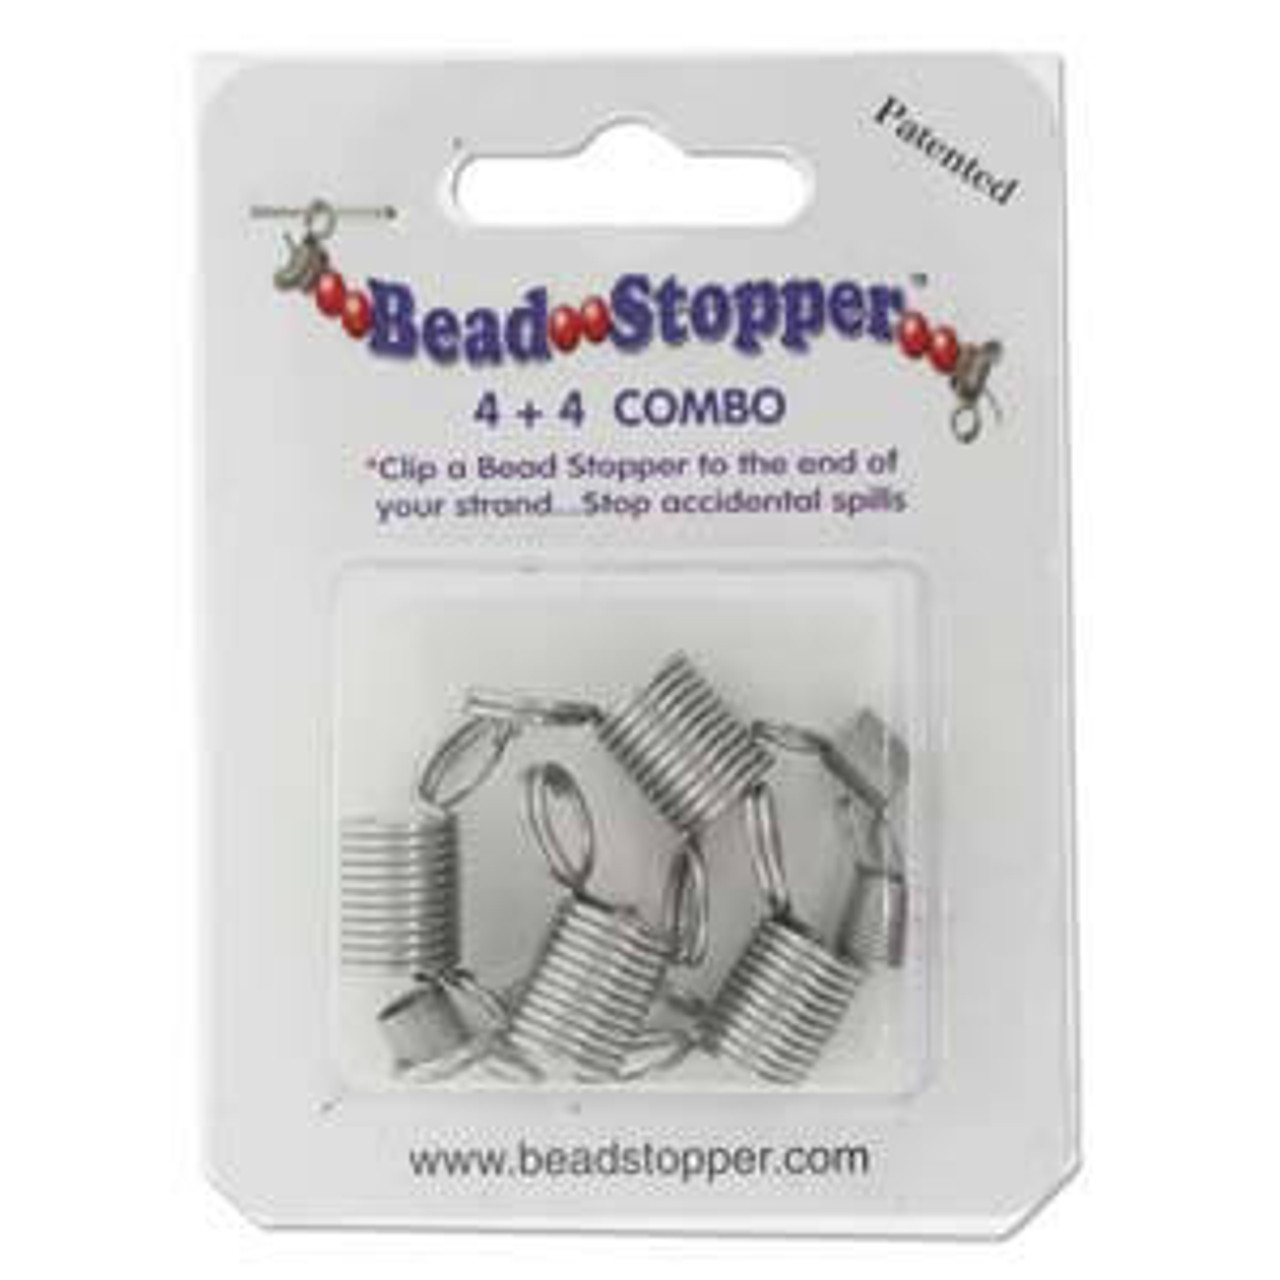 How to Use a Bead Stopper 